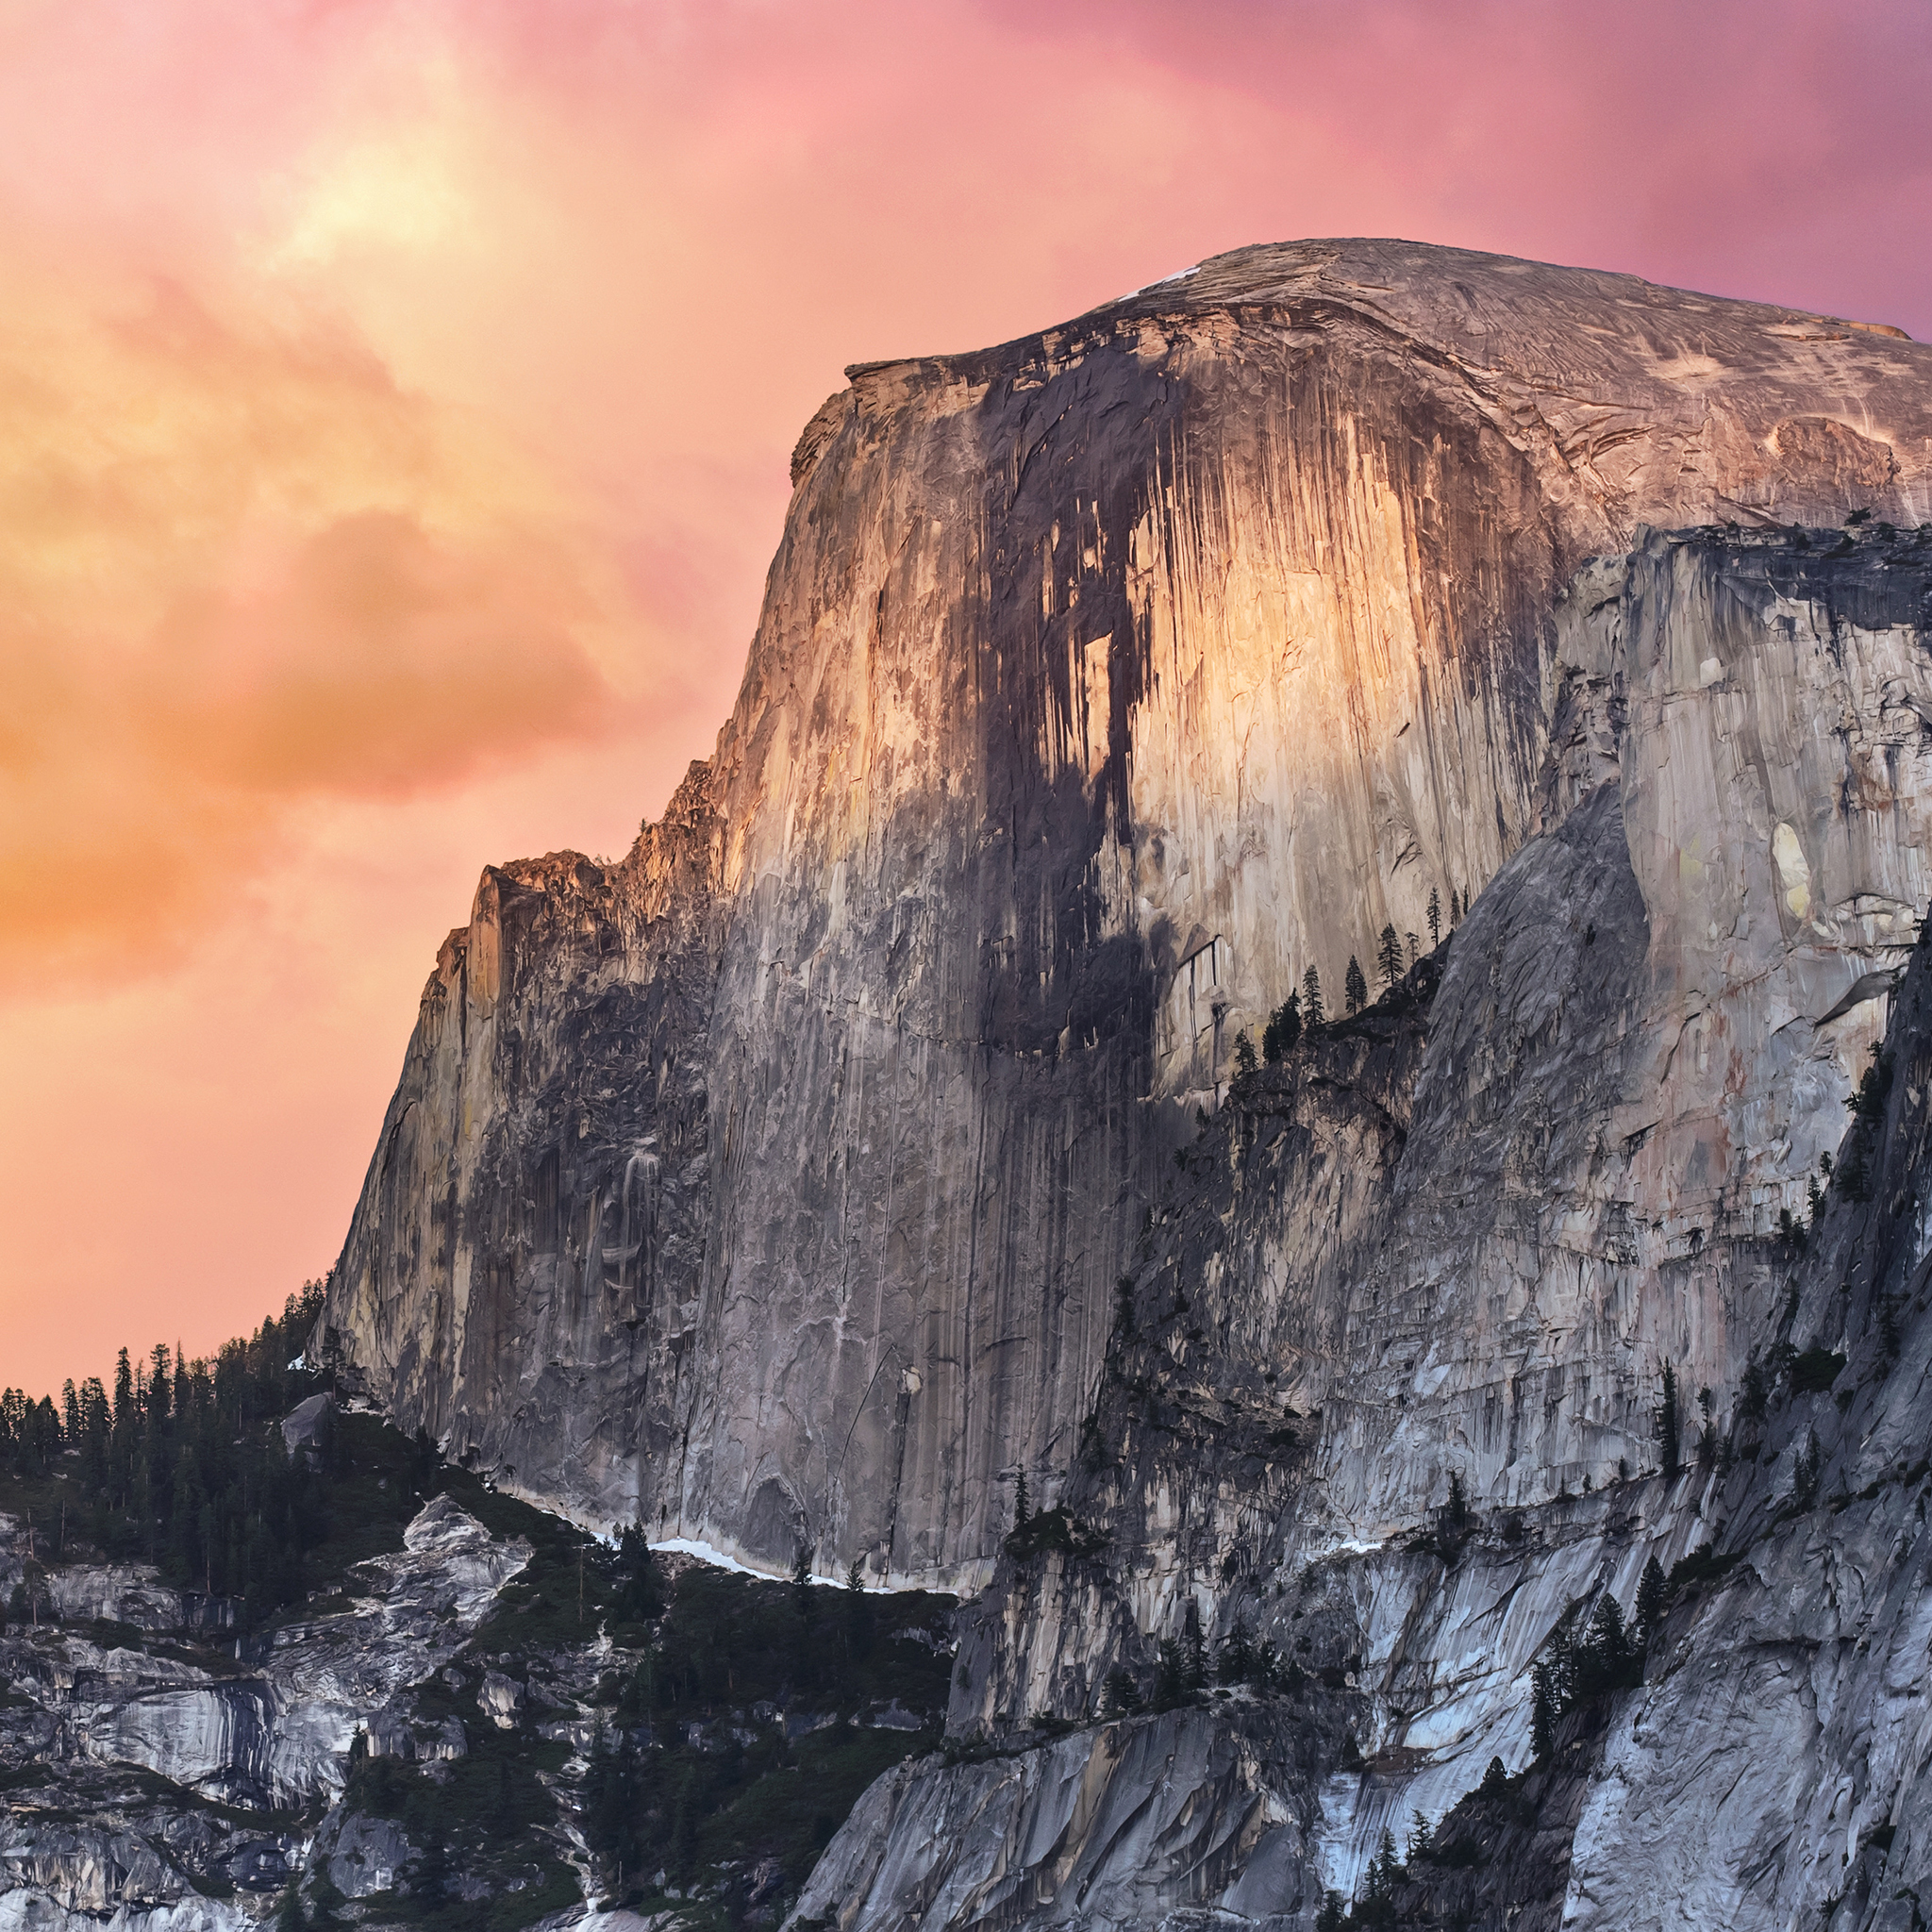 How To Get The Os X 10 10 Yosemite Wallpaper On Your Iphone Ipad